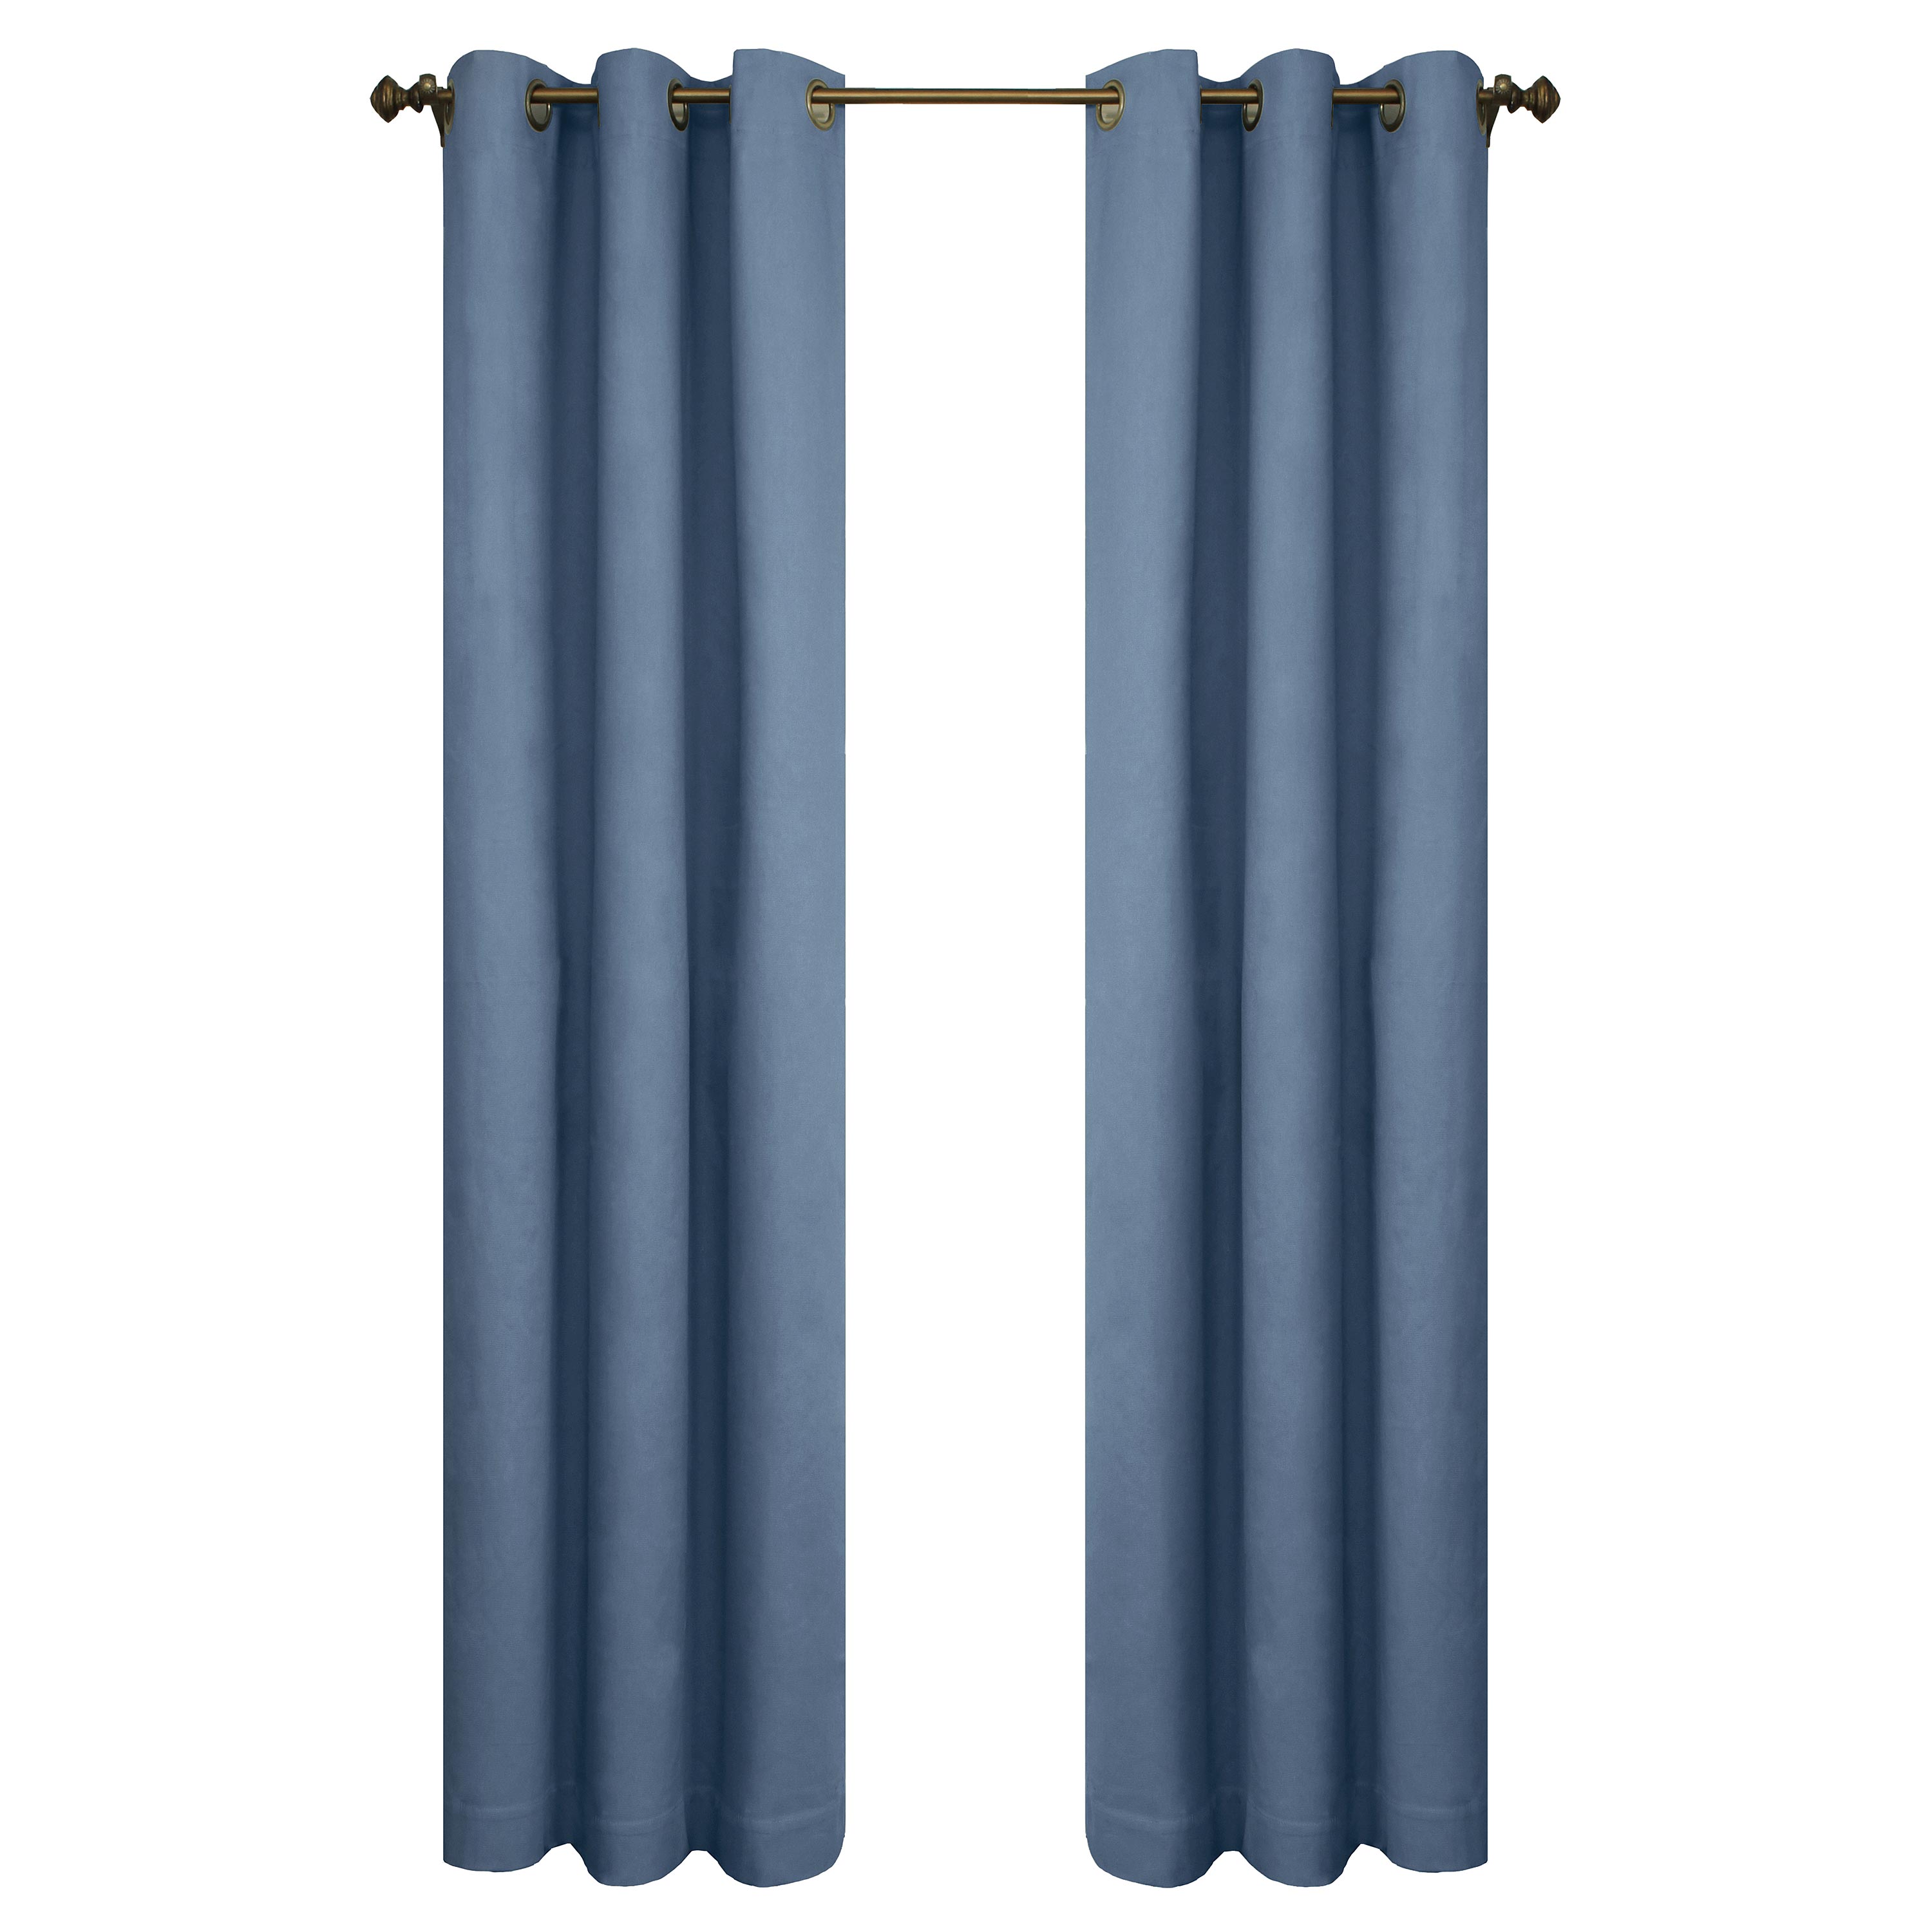 63"L Thermalogic Energy Efficient Insulated Solid Grommet-Top Curtain Pair - Blue